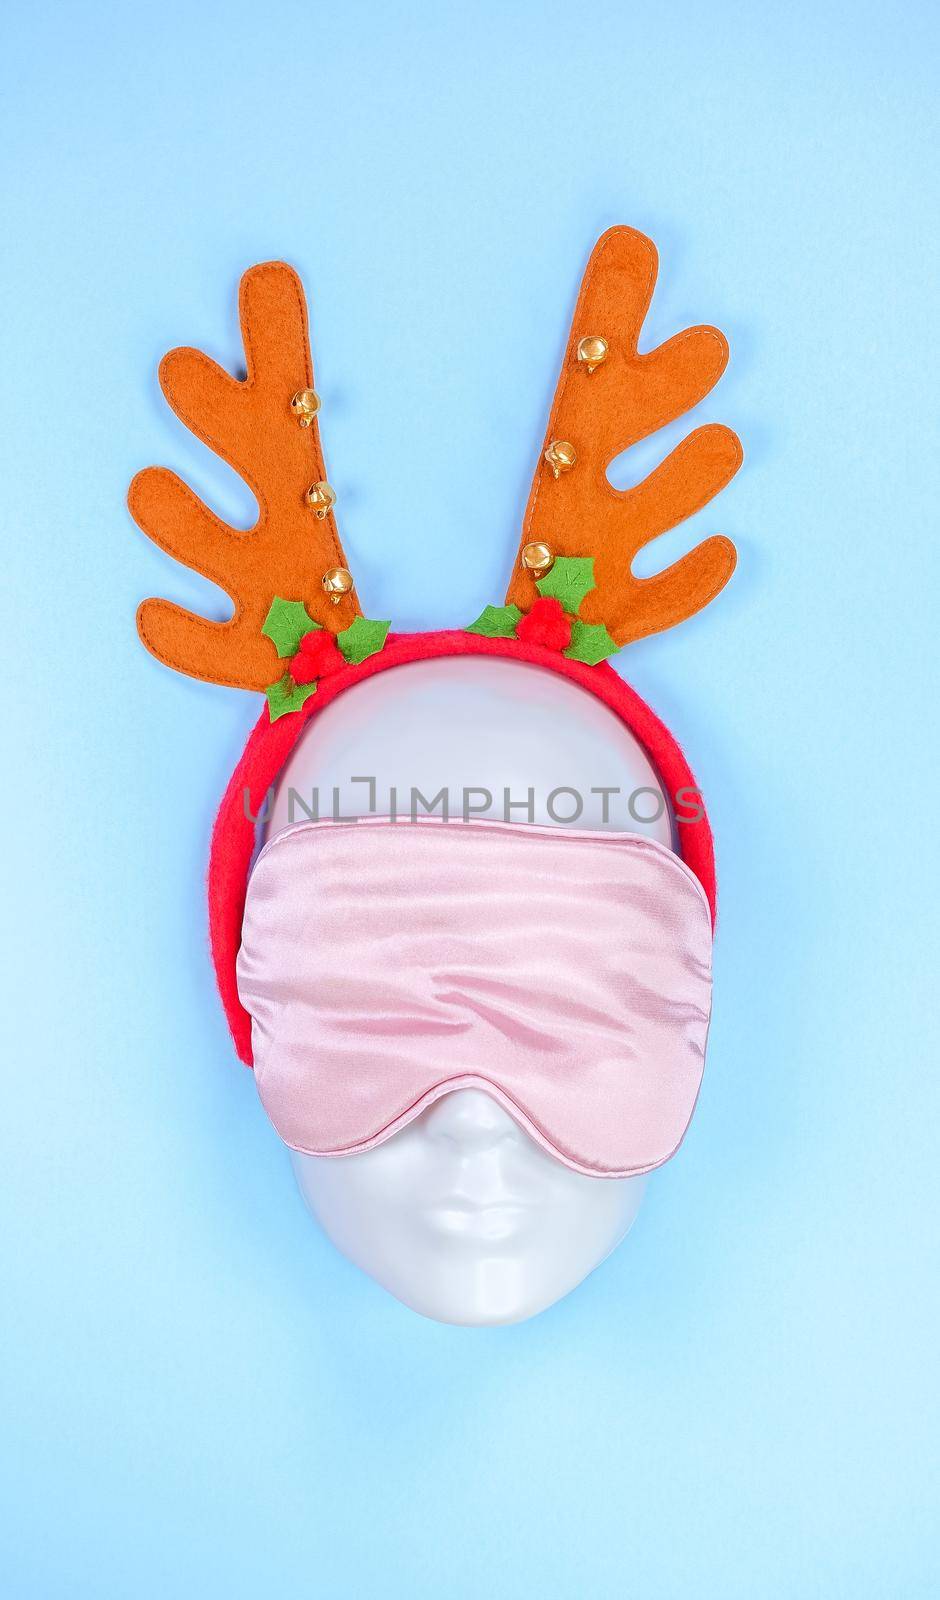 Pink sleeping eye mask on mannequin face with christmas horns on blue background, sleeping disorder. Holidays, Head accessory. Plastic face